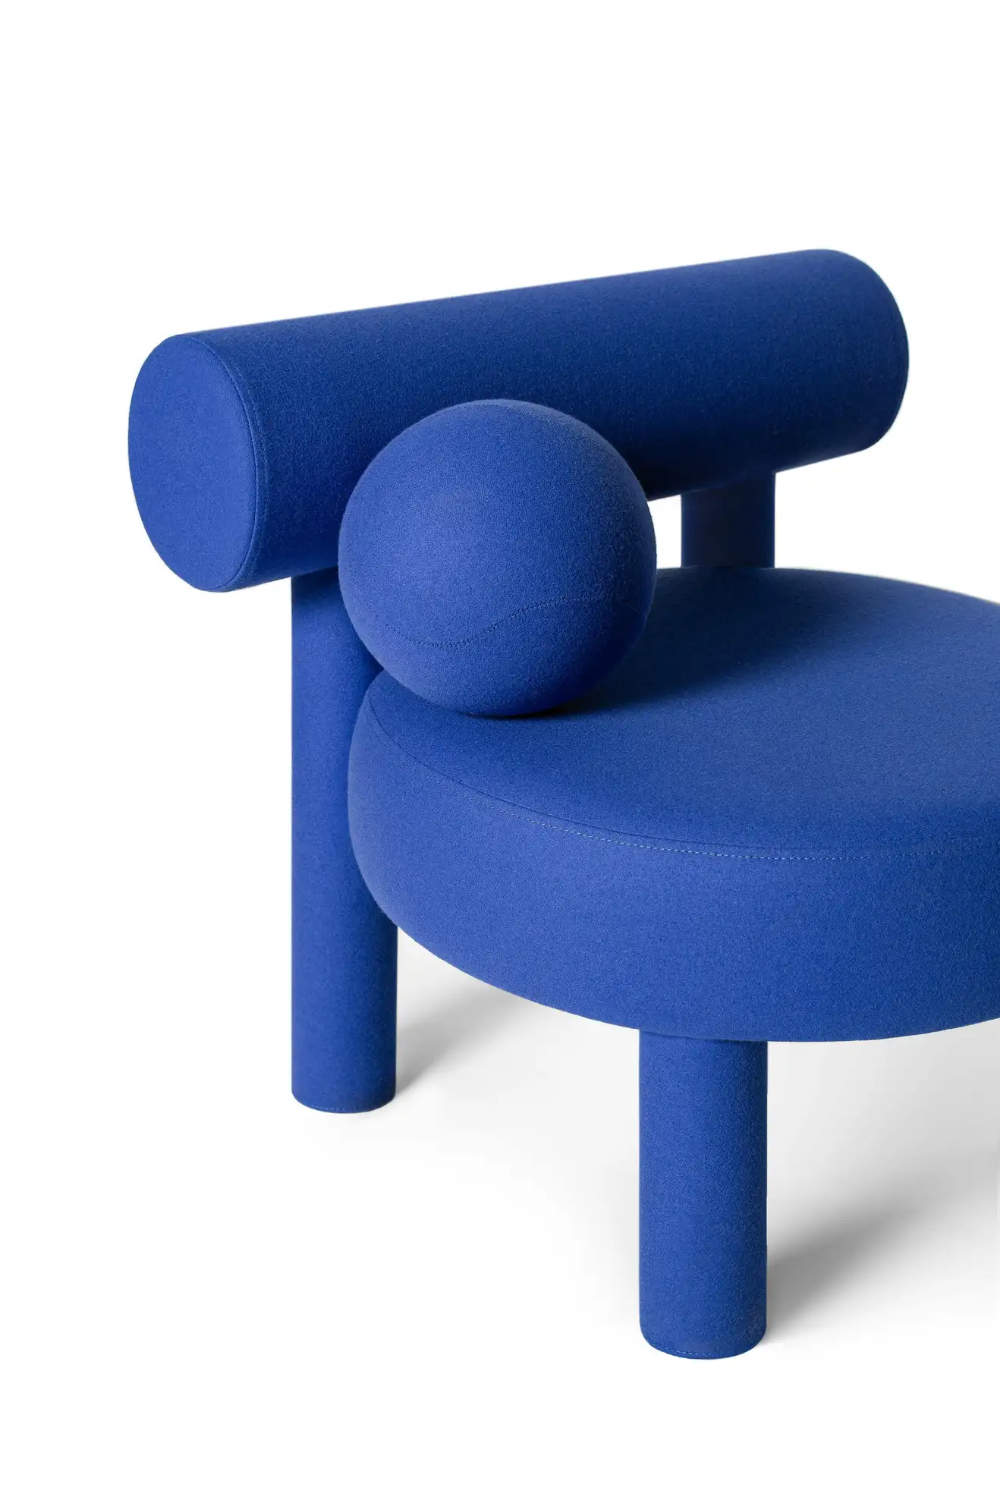 The Benefits of Adding a Blue Chair to
Your Home Décor